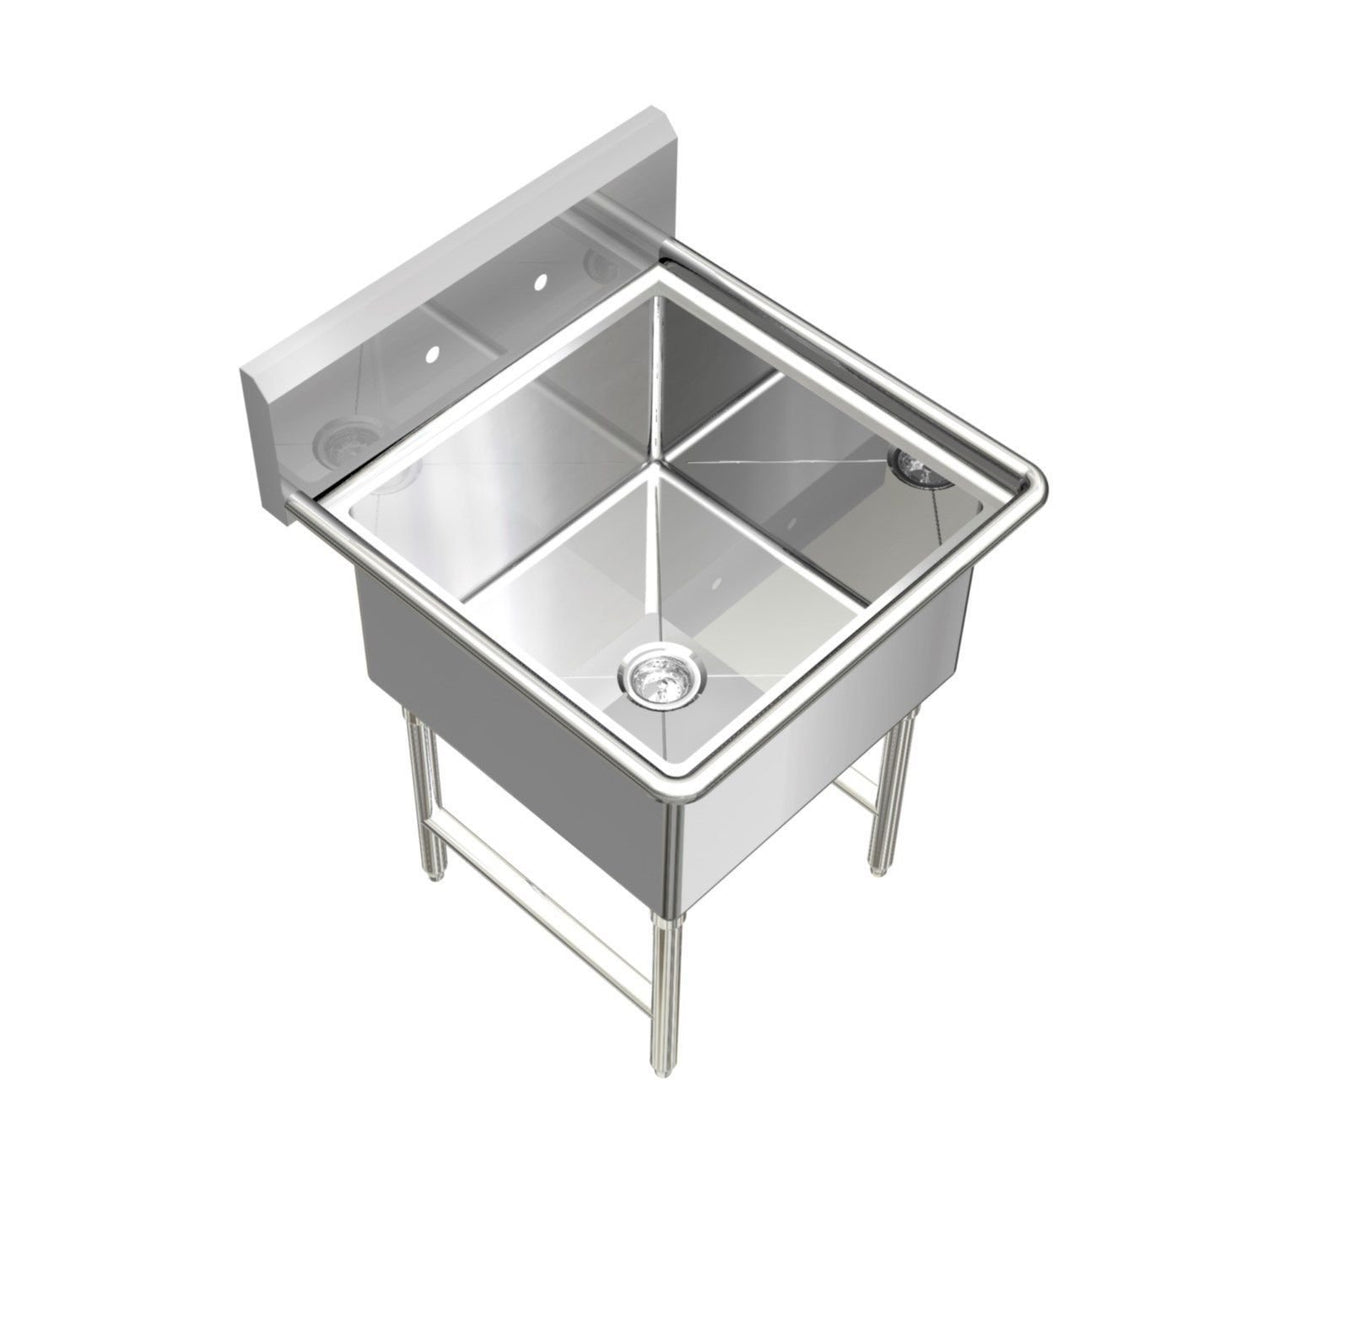 All Compartment Sinks